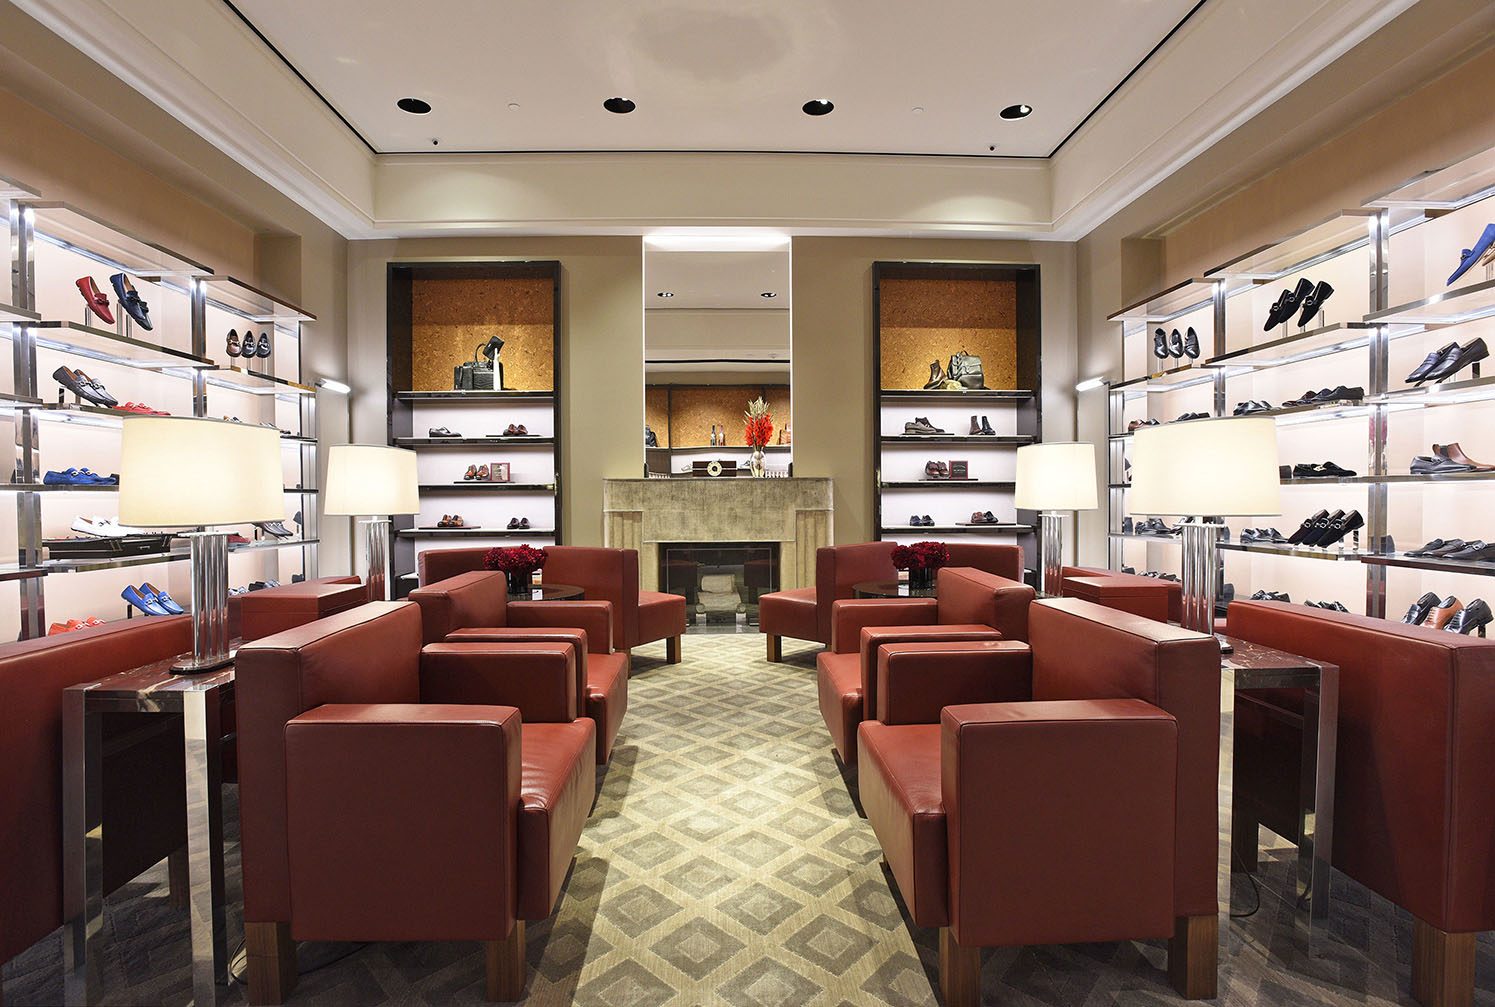 Salvatore Ferragamo store at the Beverly Center, Los Angeles, California,  by Valerio Architects